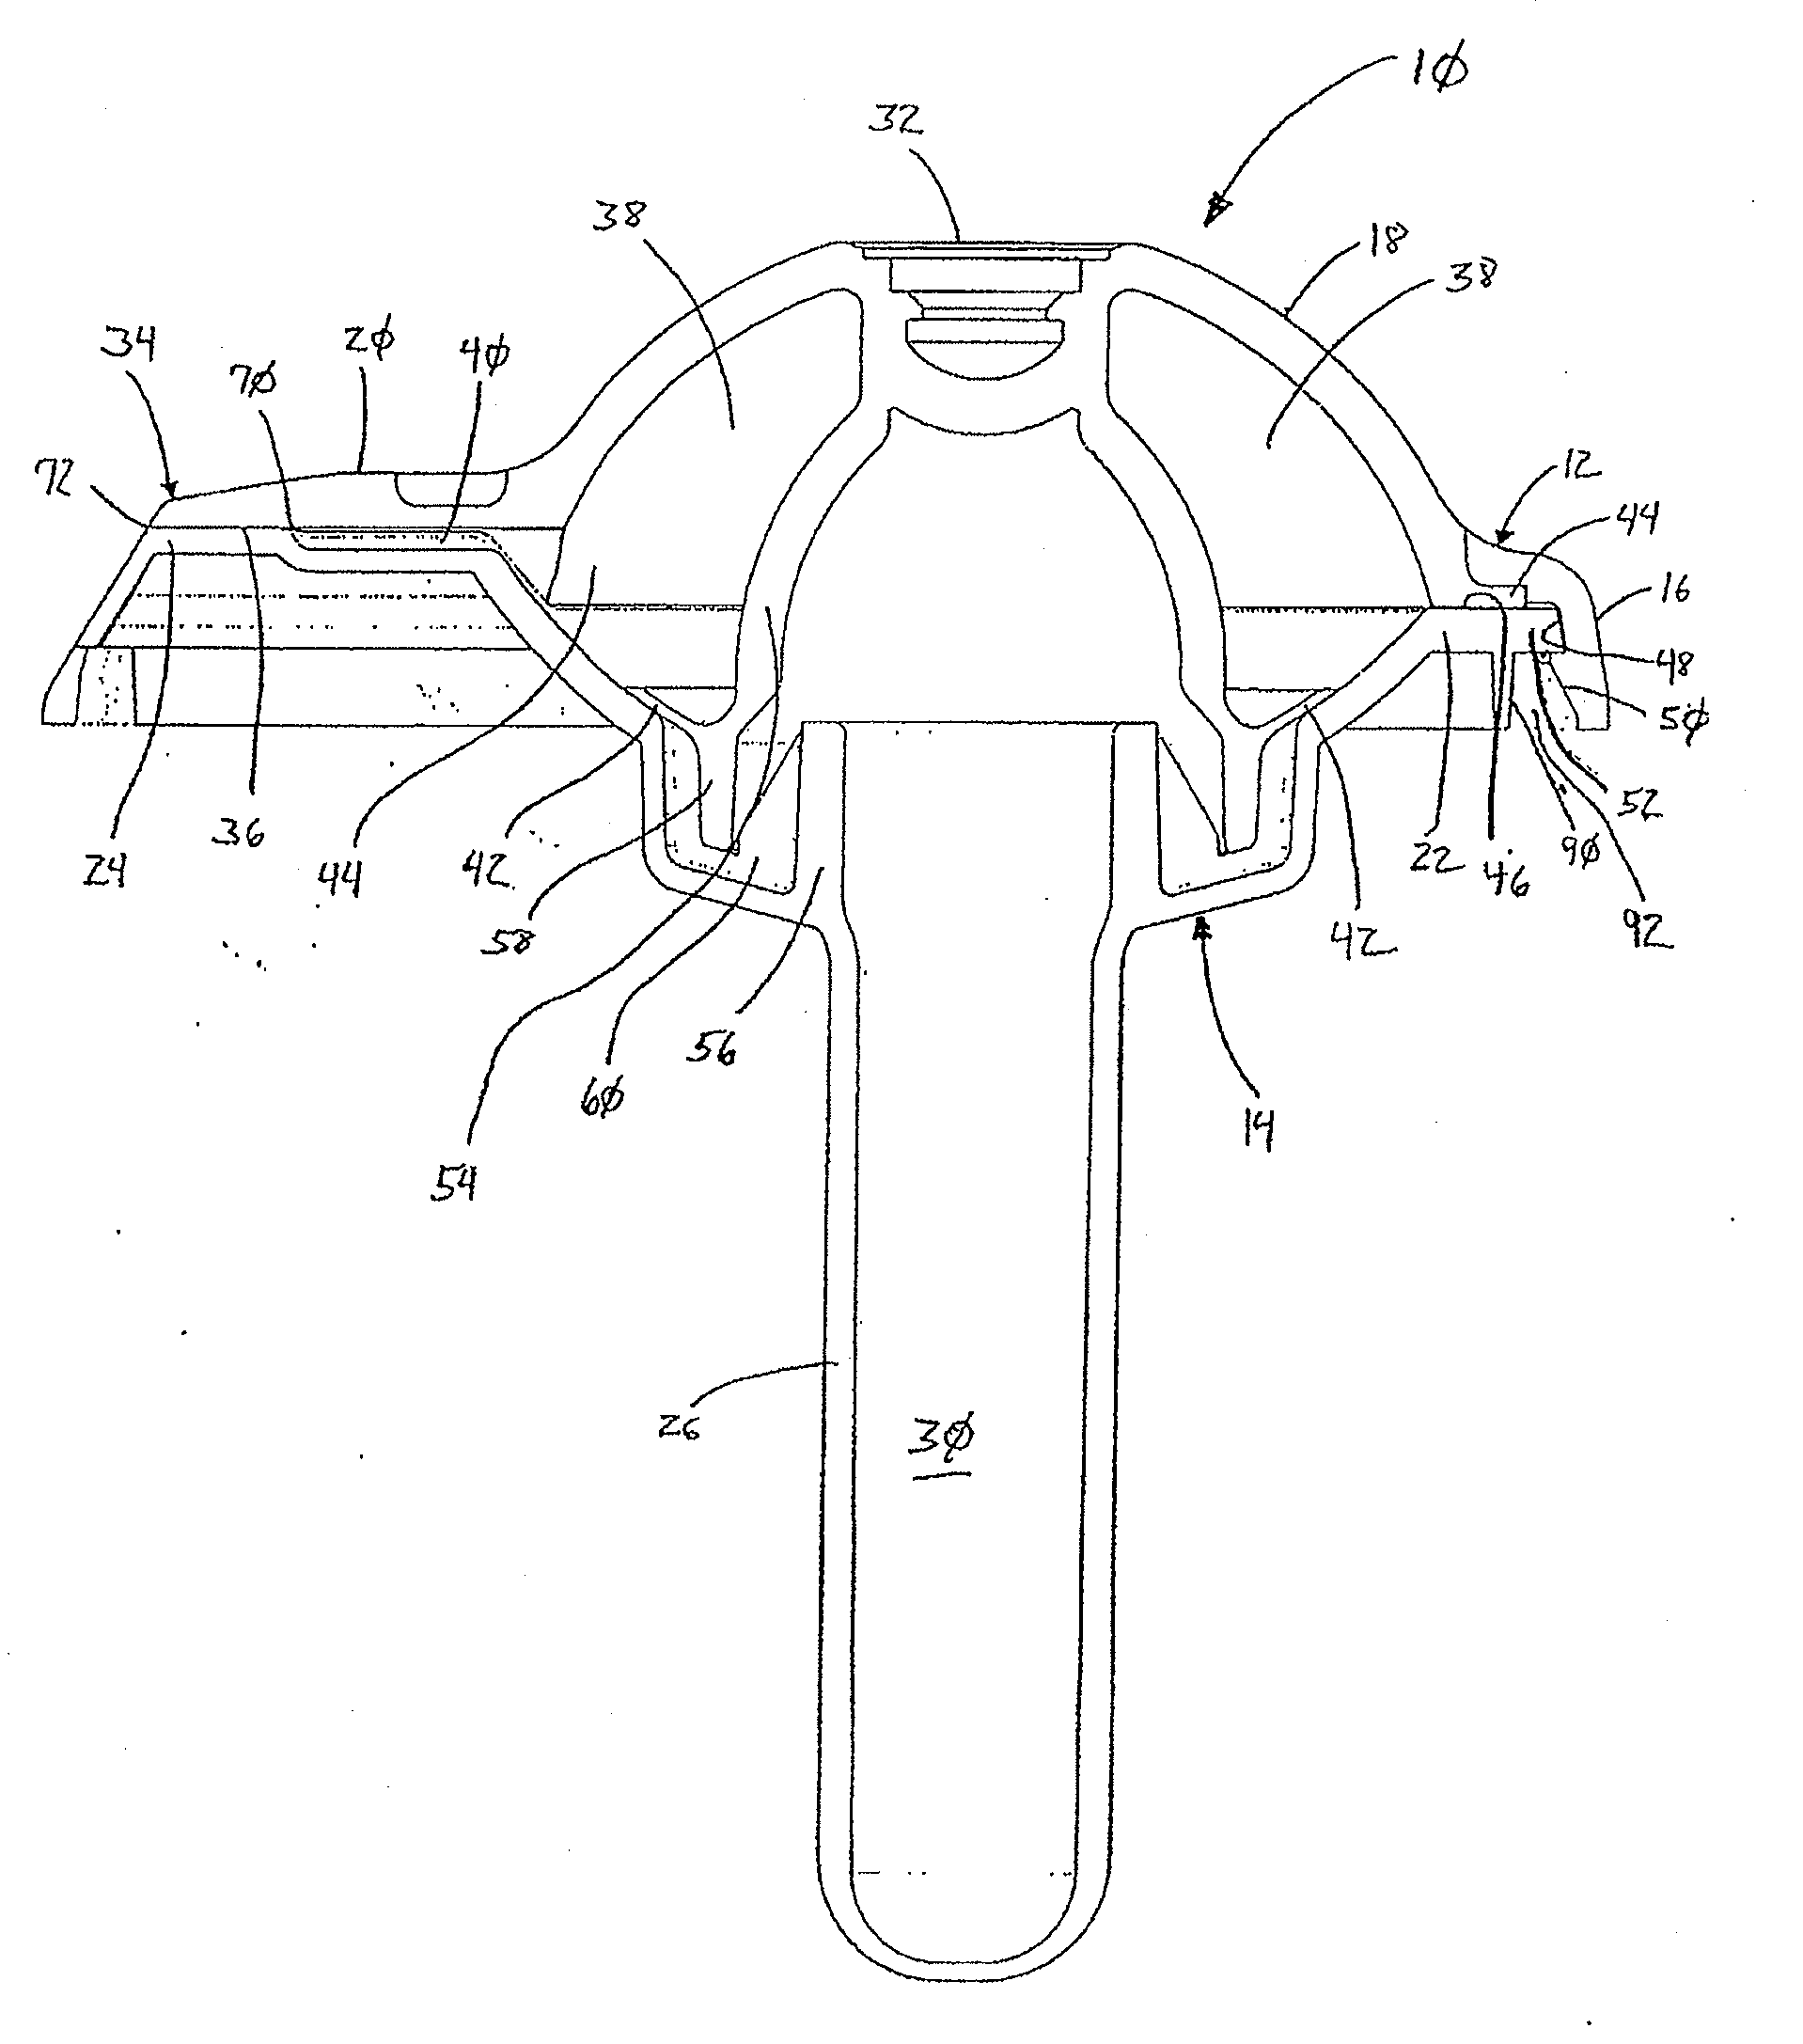 Device with co-molded closure, one-way valve and variable-volume storage chamber, and related method